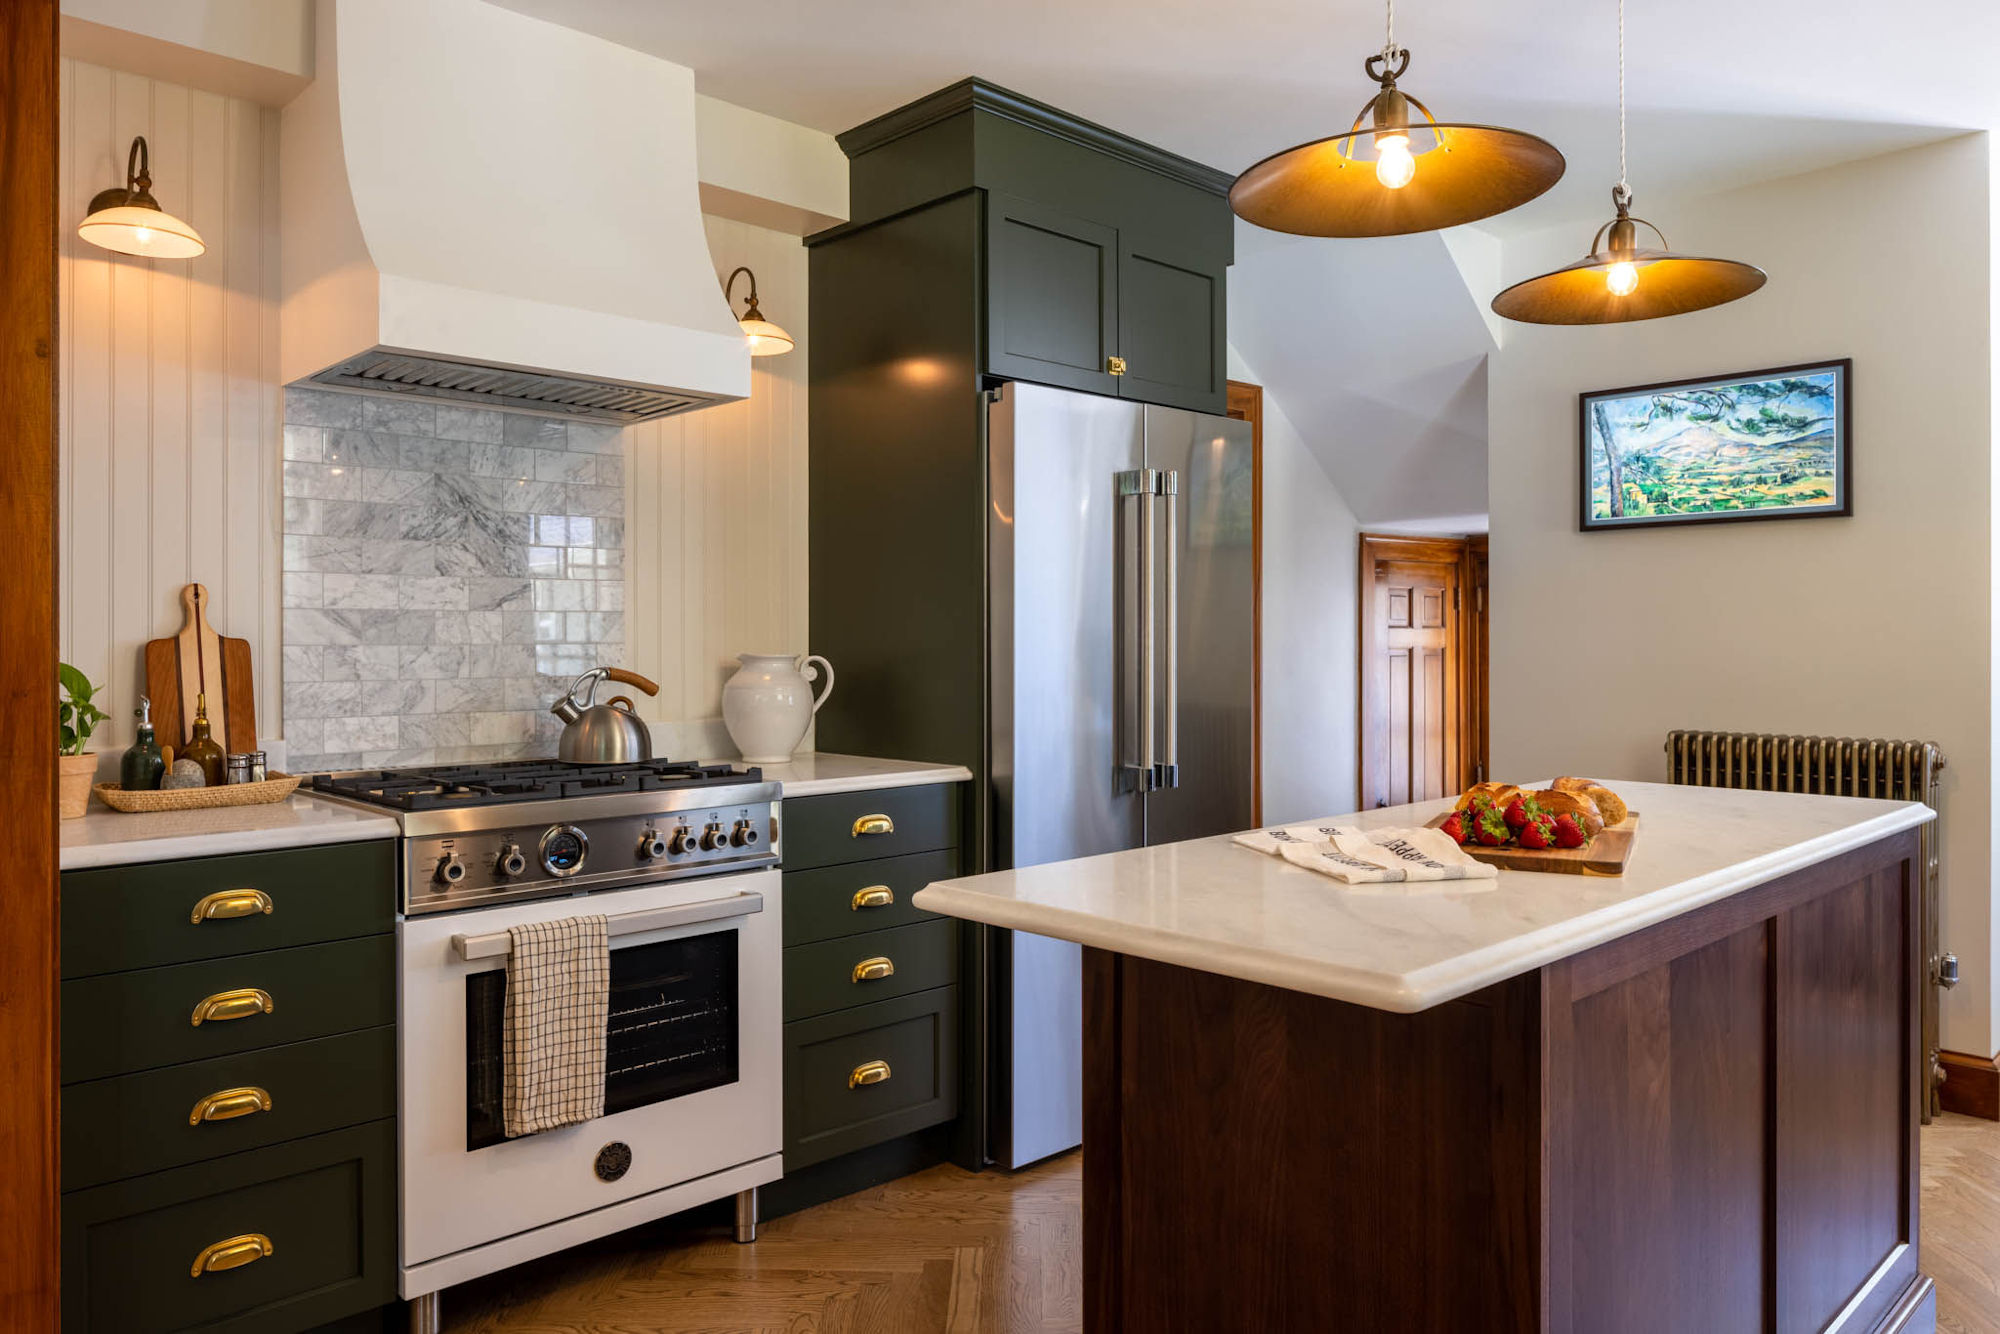 Melrose kitchen design and remodel with olive green and walnut cabinets